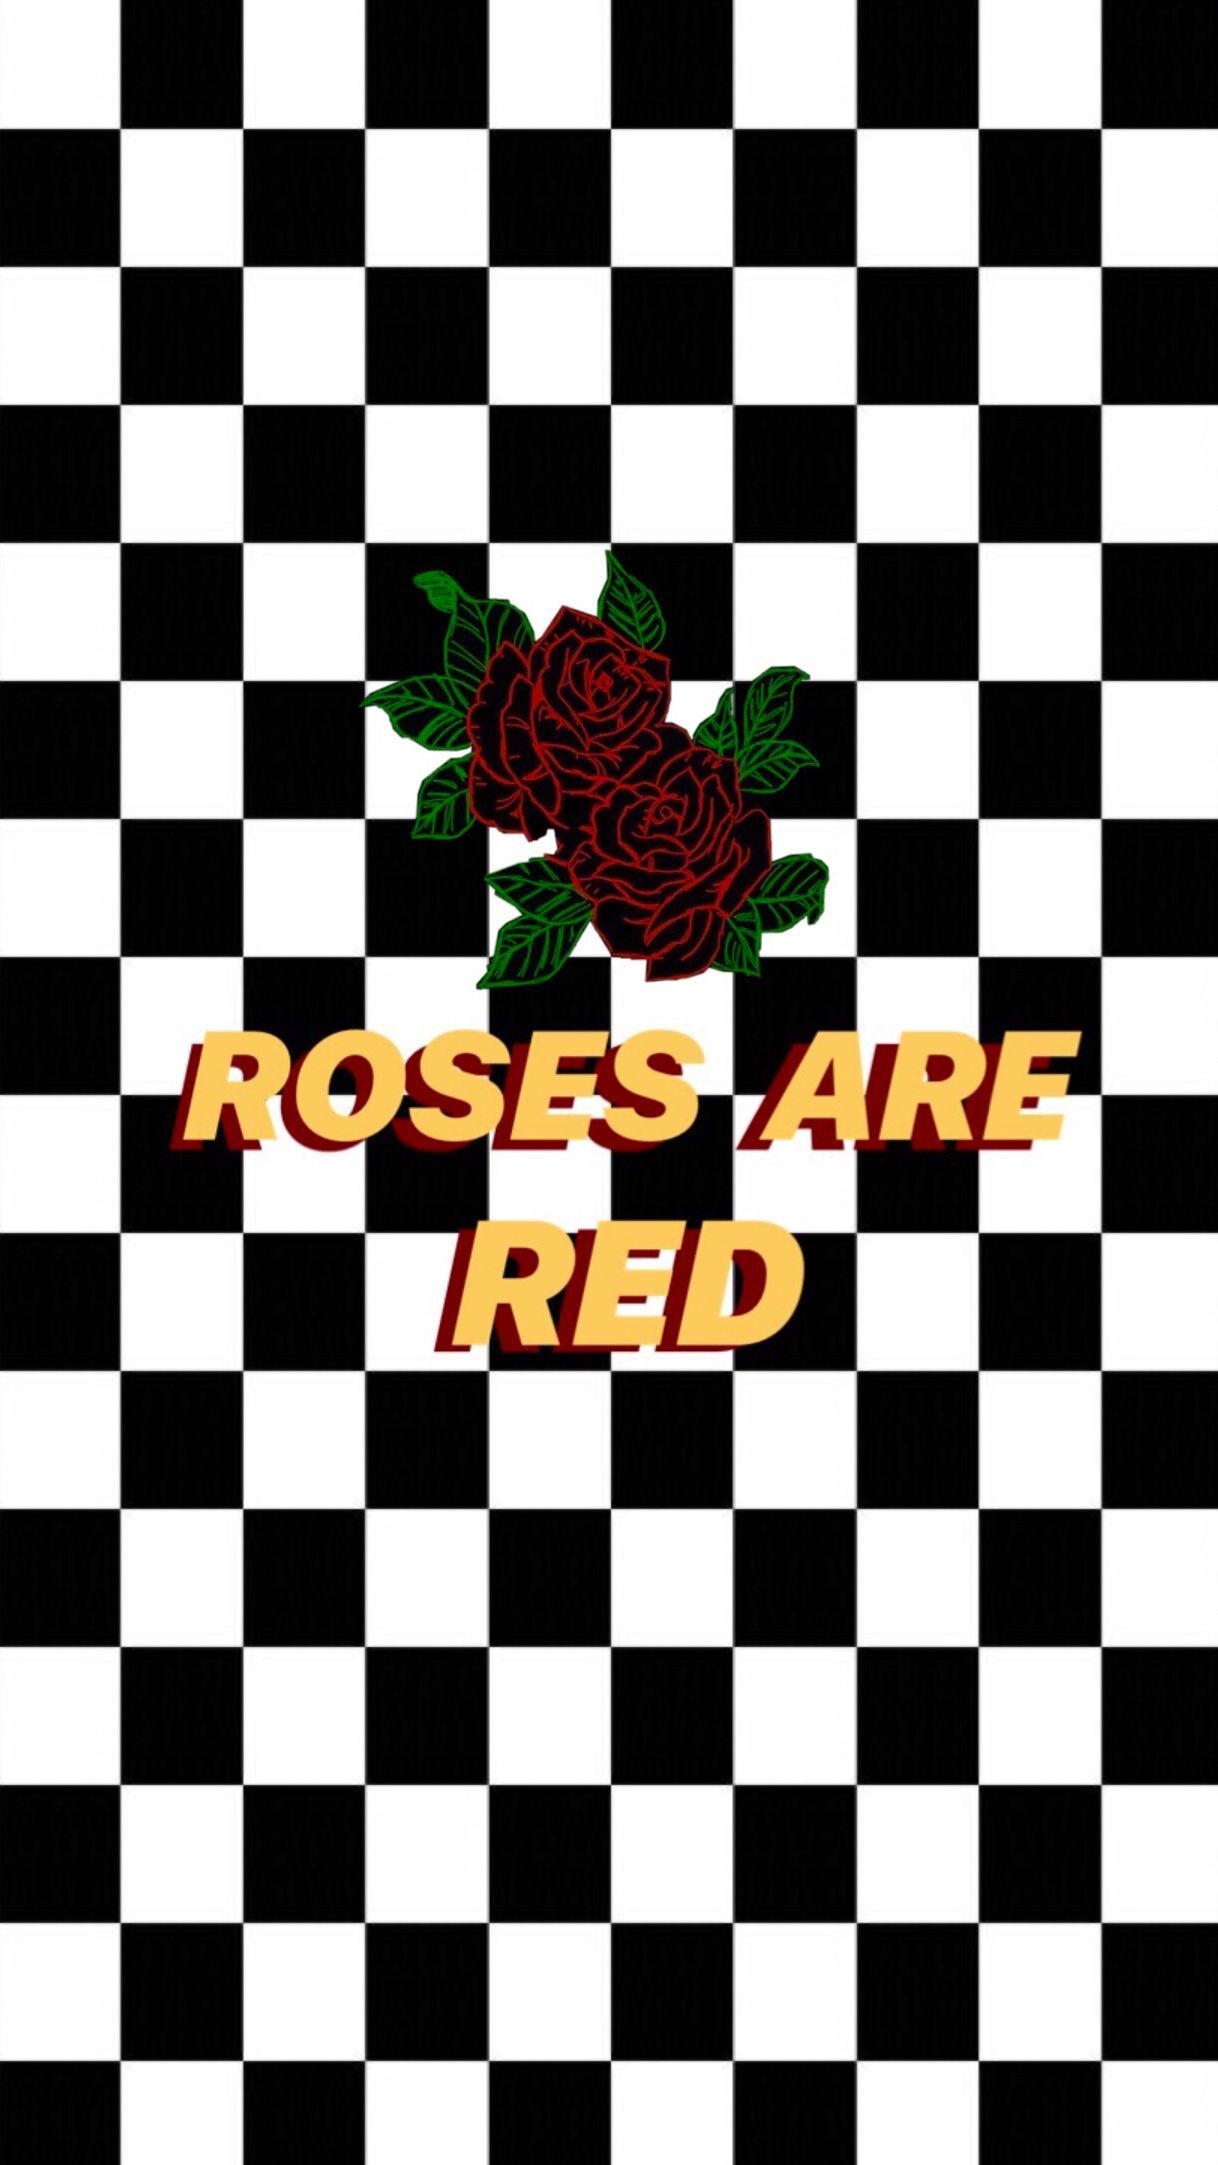 Checkers ft roses. Edgy wallpaper, Aesthetic iphone